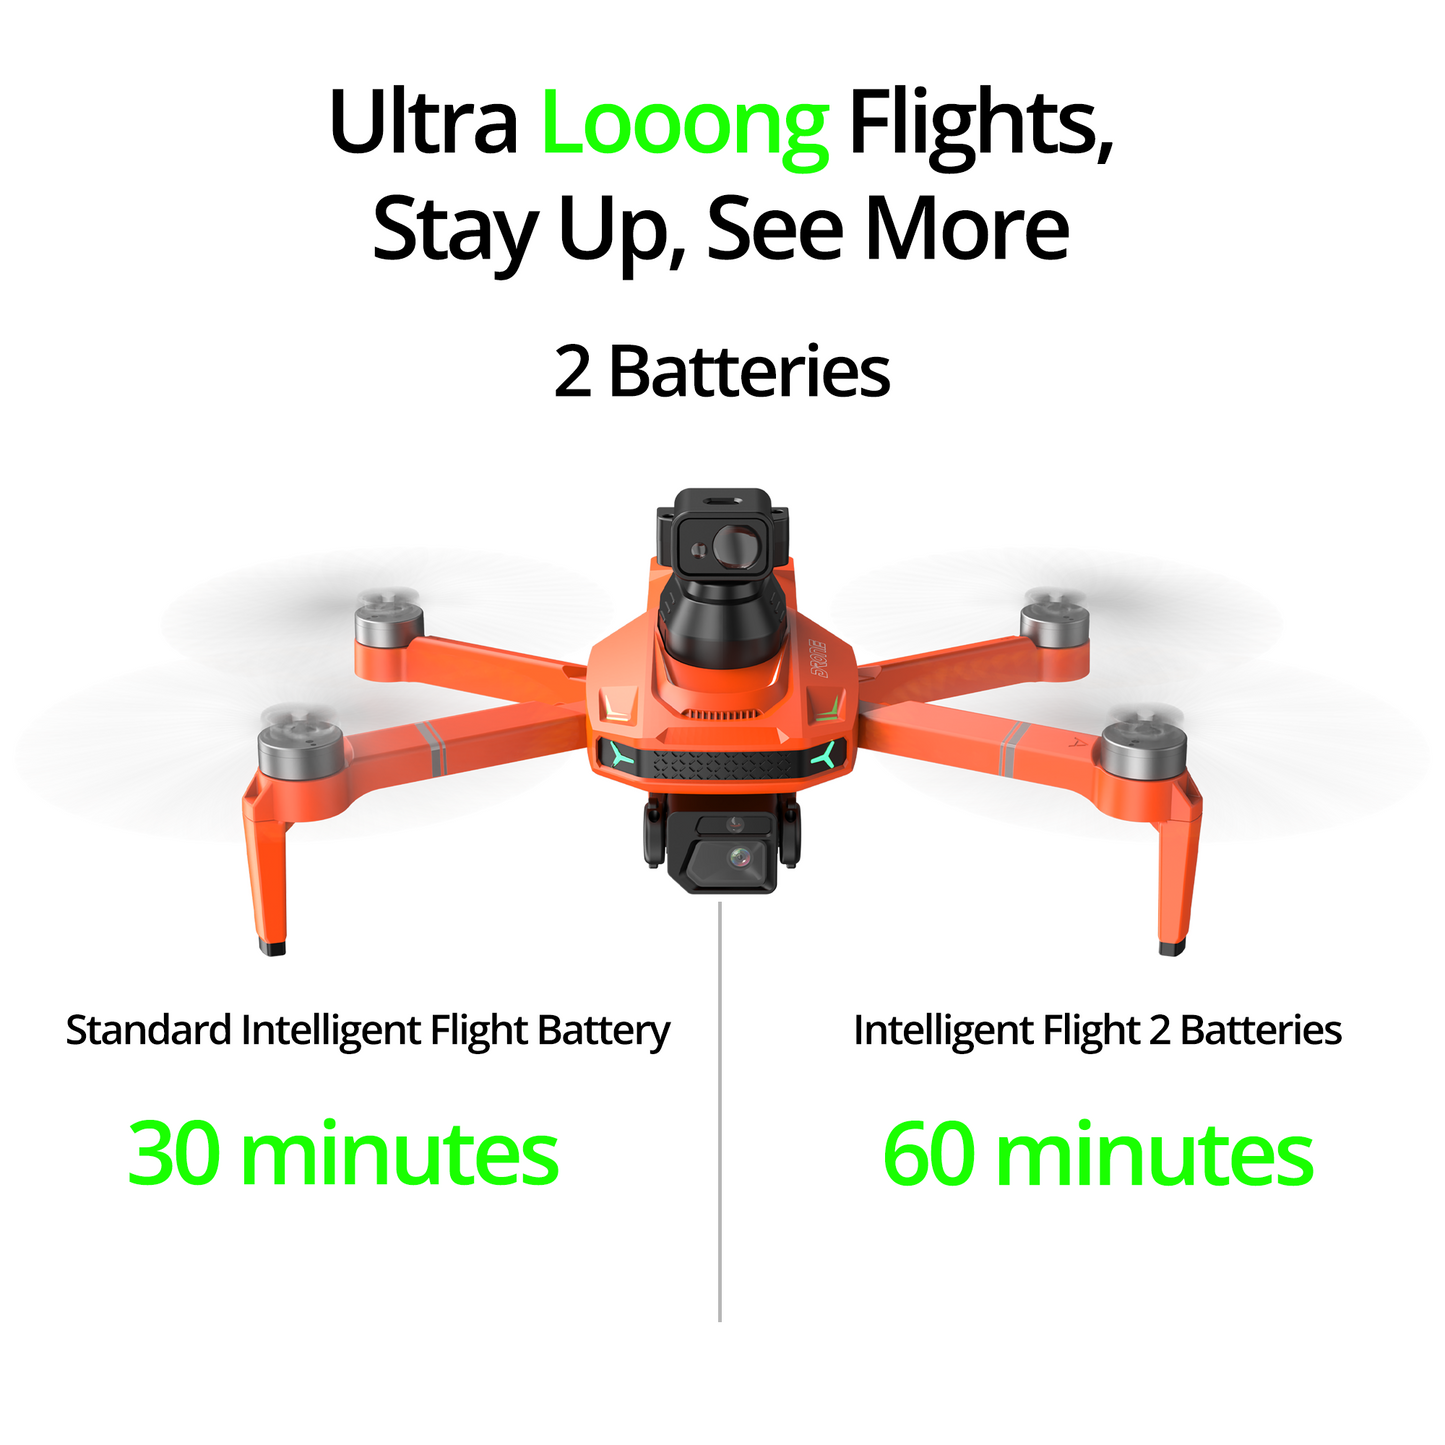 The Bigly Brothers E59 Mark III Delta Orange Superior Edition, 60-Min Flight Time, Obstacle Avoidance Drone with Camera, 720 Degrees of Obstacle Avoidance Drone with Carrying Case Below 249g